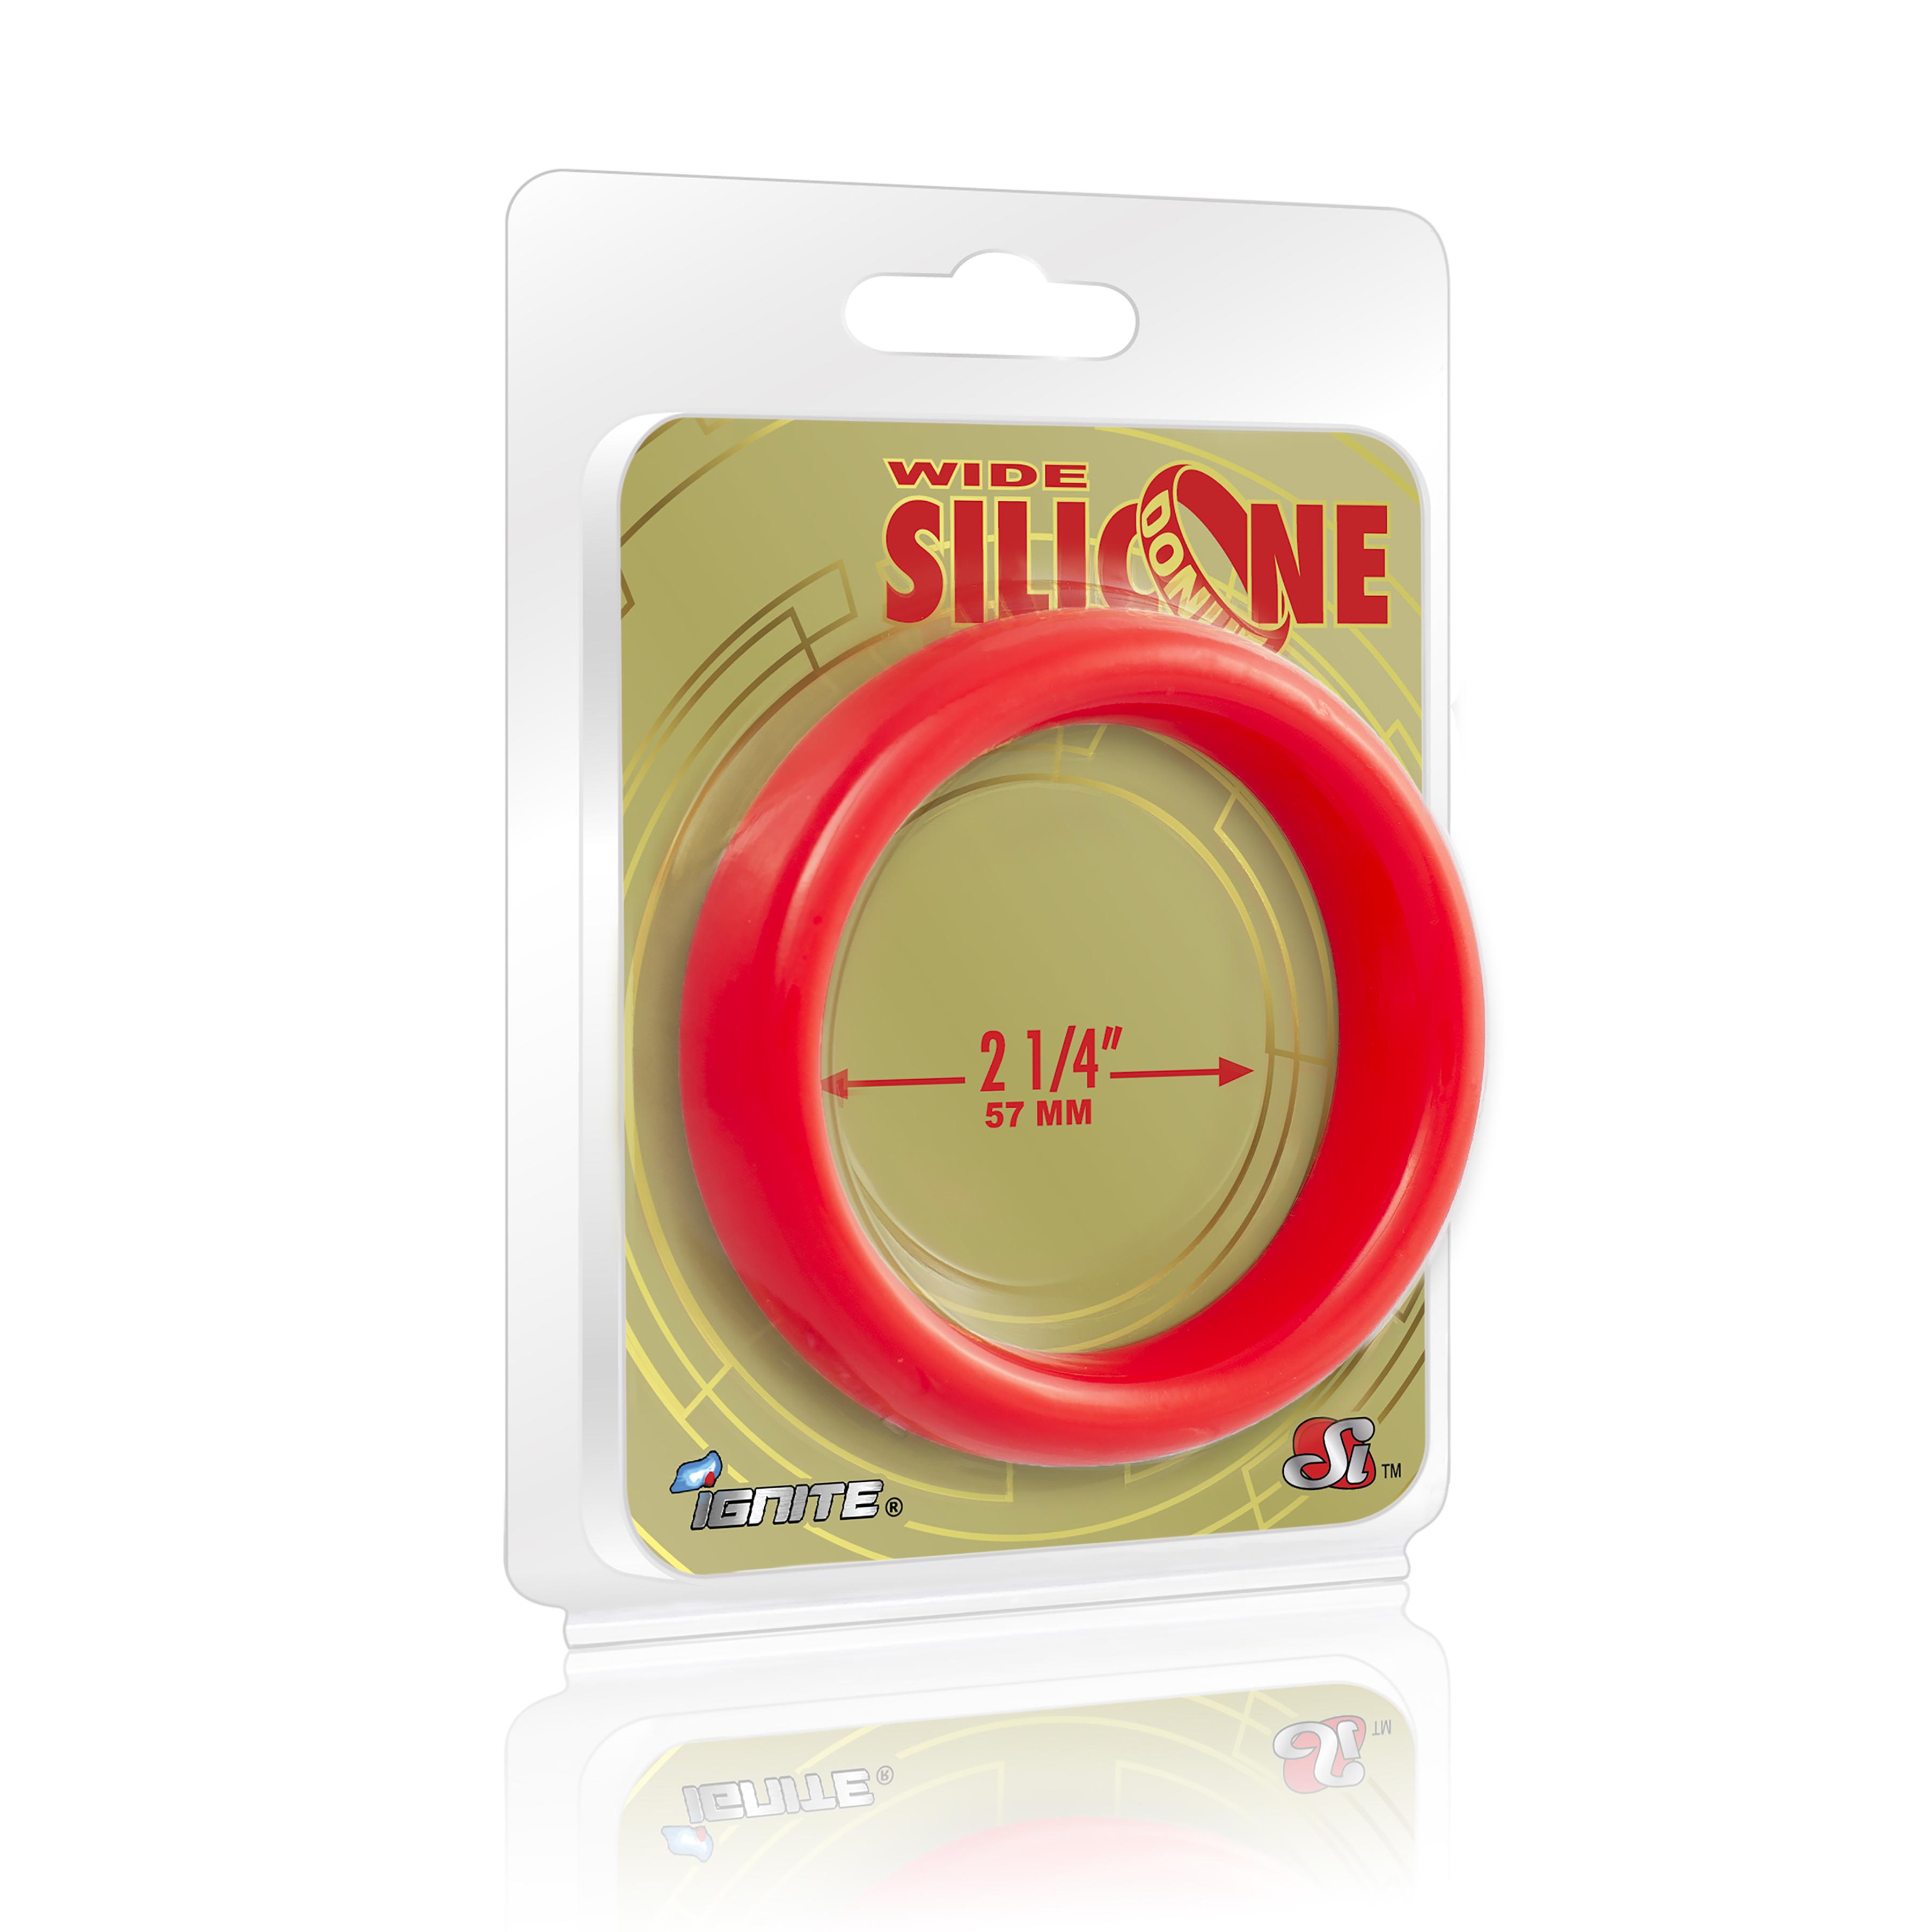 SI IGNITE Wide Silicone Donut Cockring, ¯ 57 mm, Red